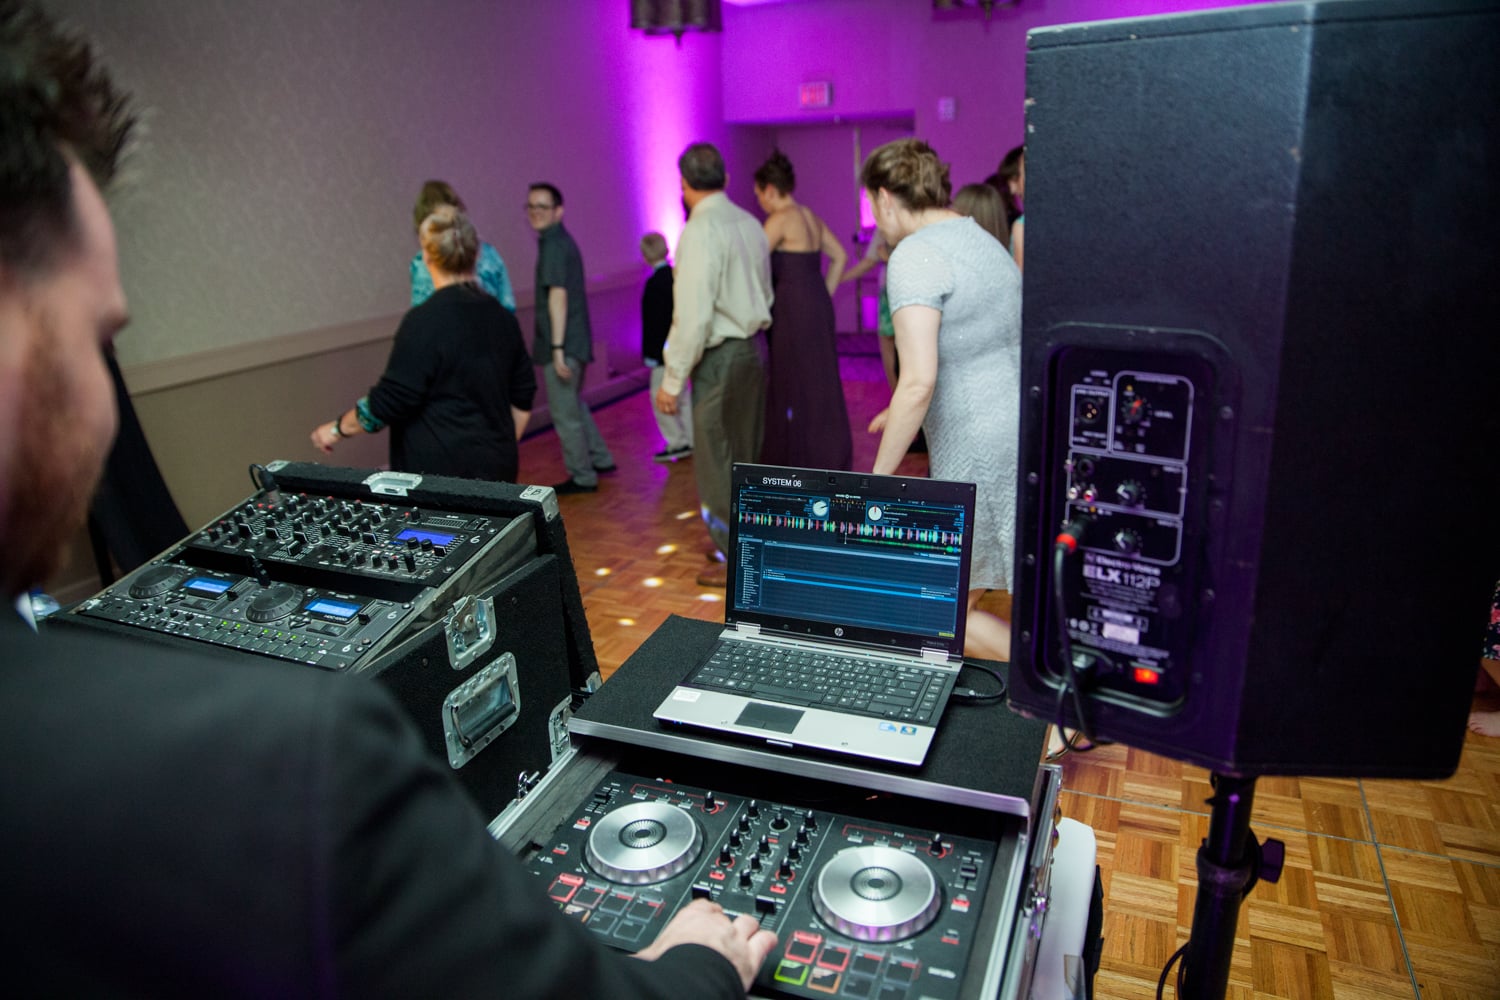 A DJ is behind his equipment at a wedding reception